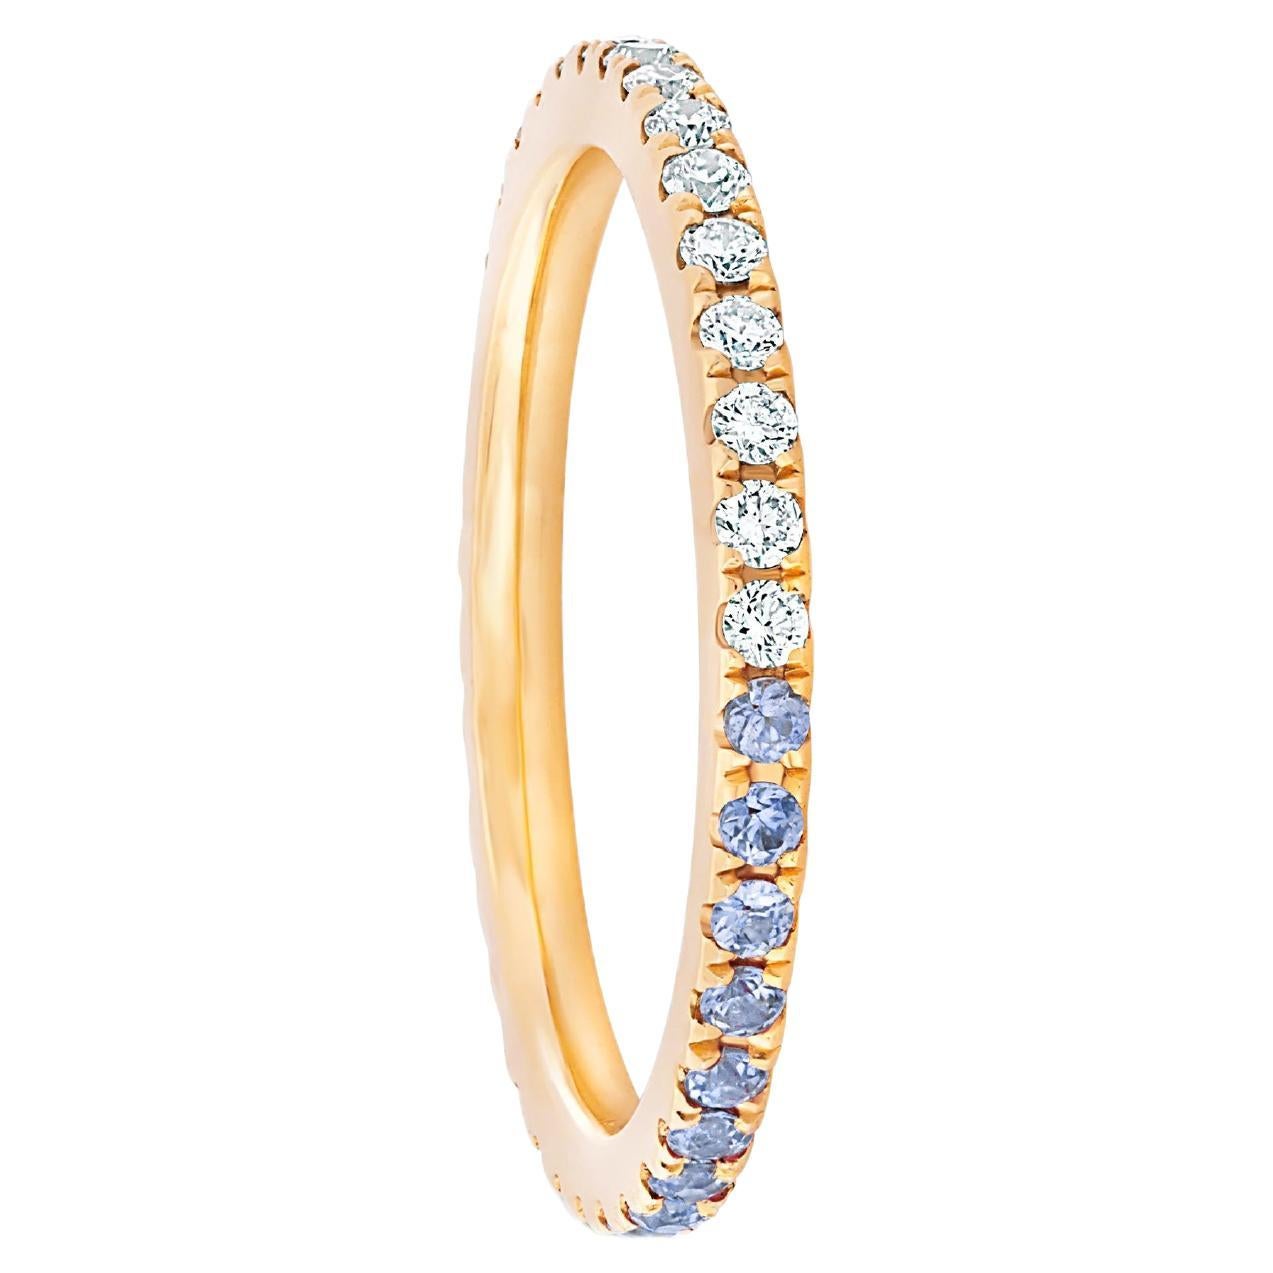 For Sale:  Ombre Blue Lab Topaz and Moissanite 14k gold Eternity Band.